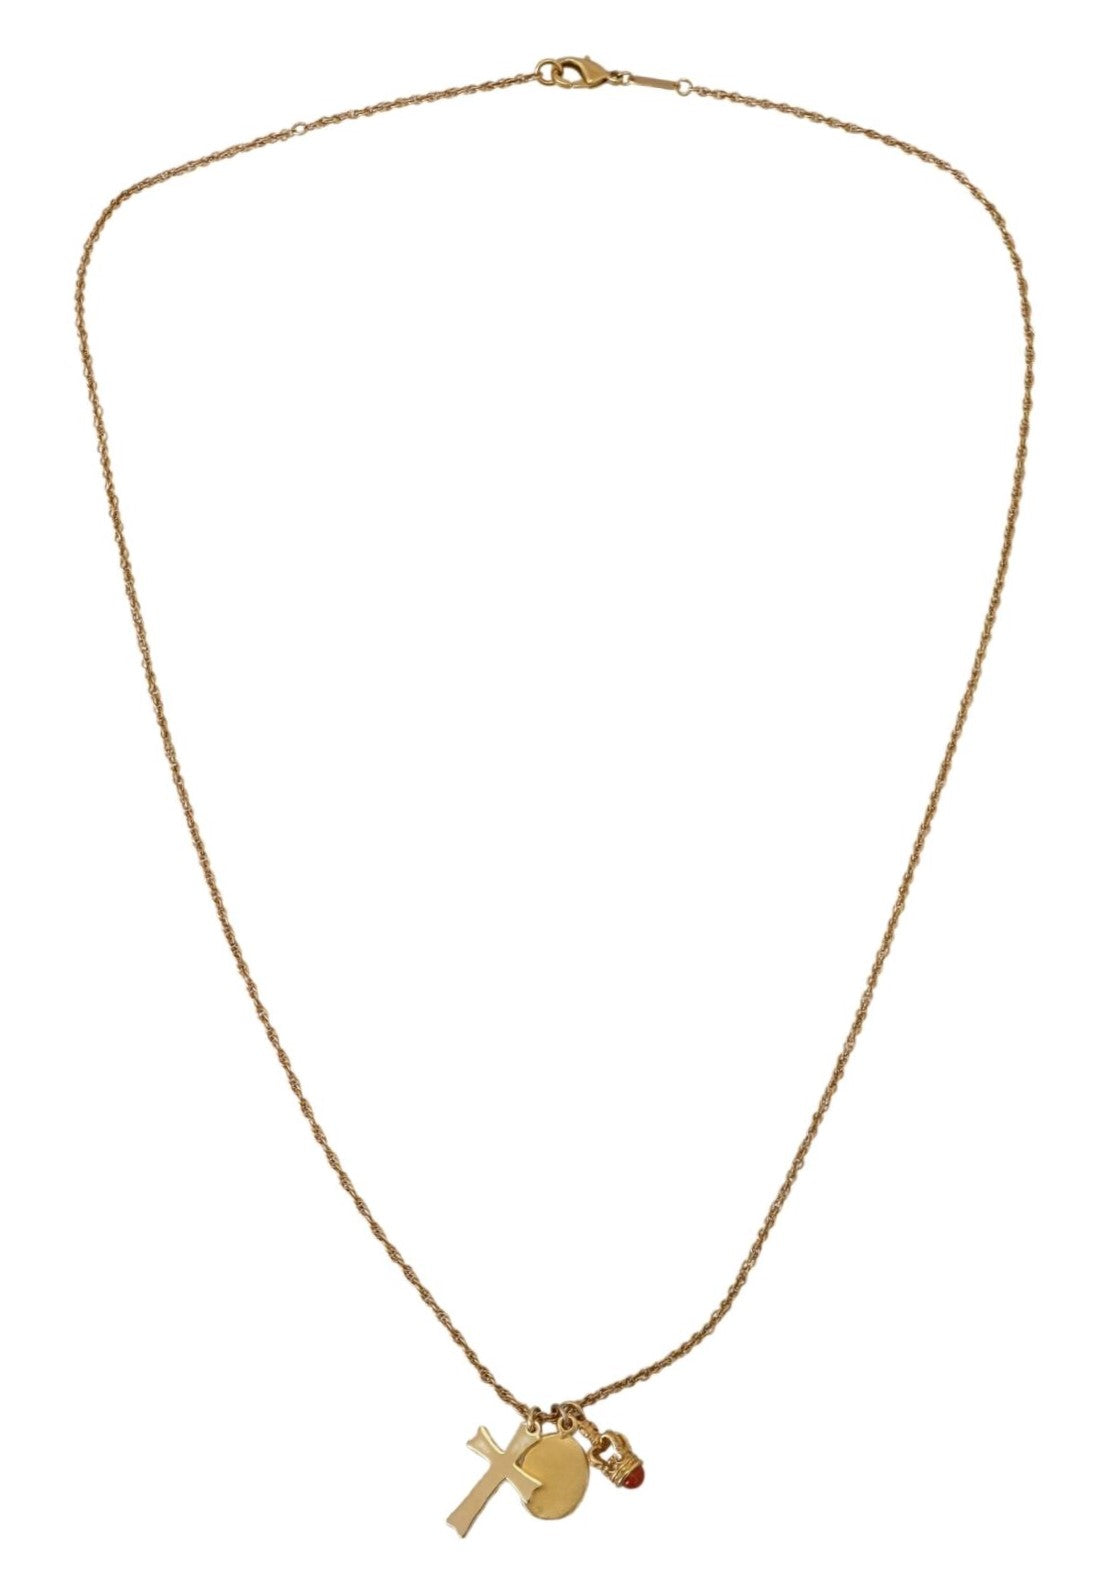 Elegant Gold Tone Charm Necklace with Cross Pendant